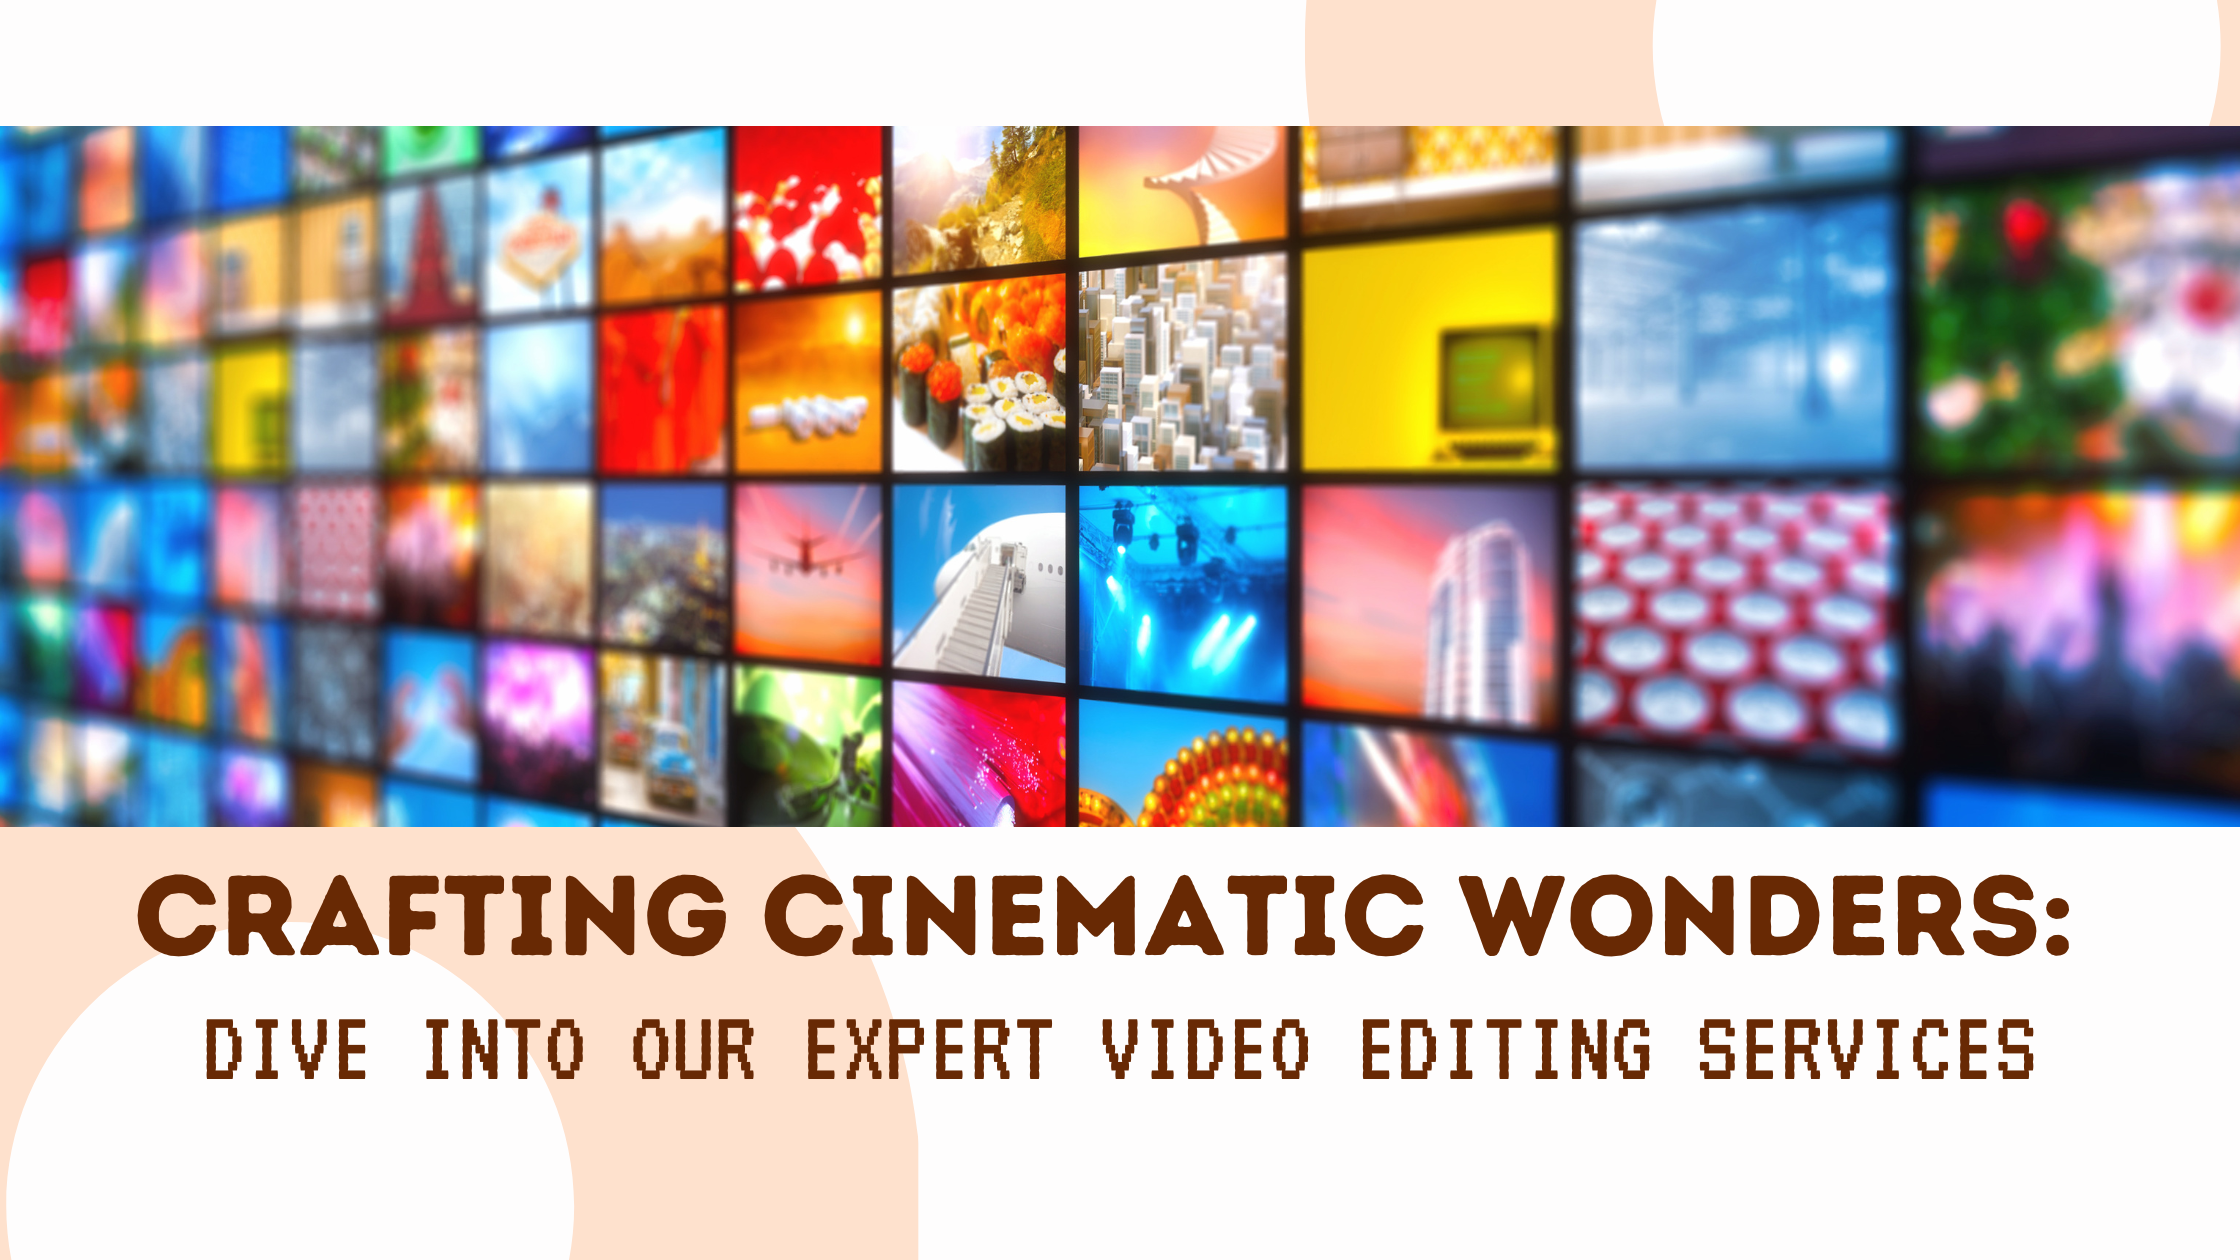 Crafting Cinematic Wonders: Dive into Our Expert Video Editing Services